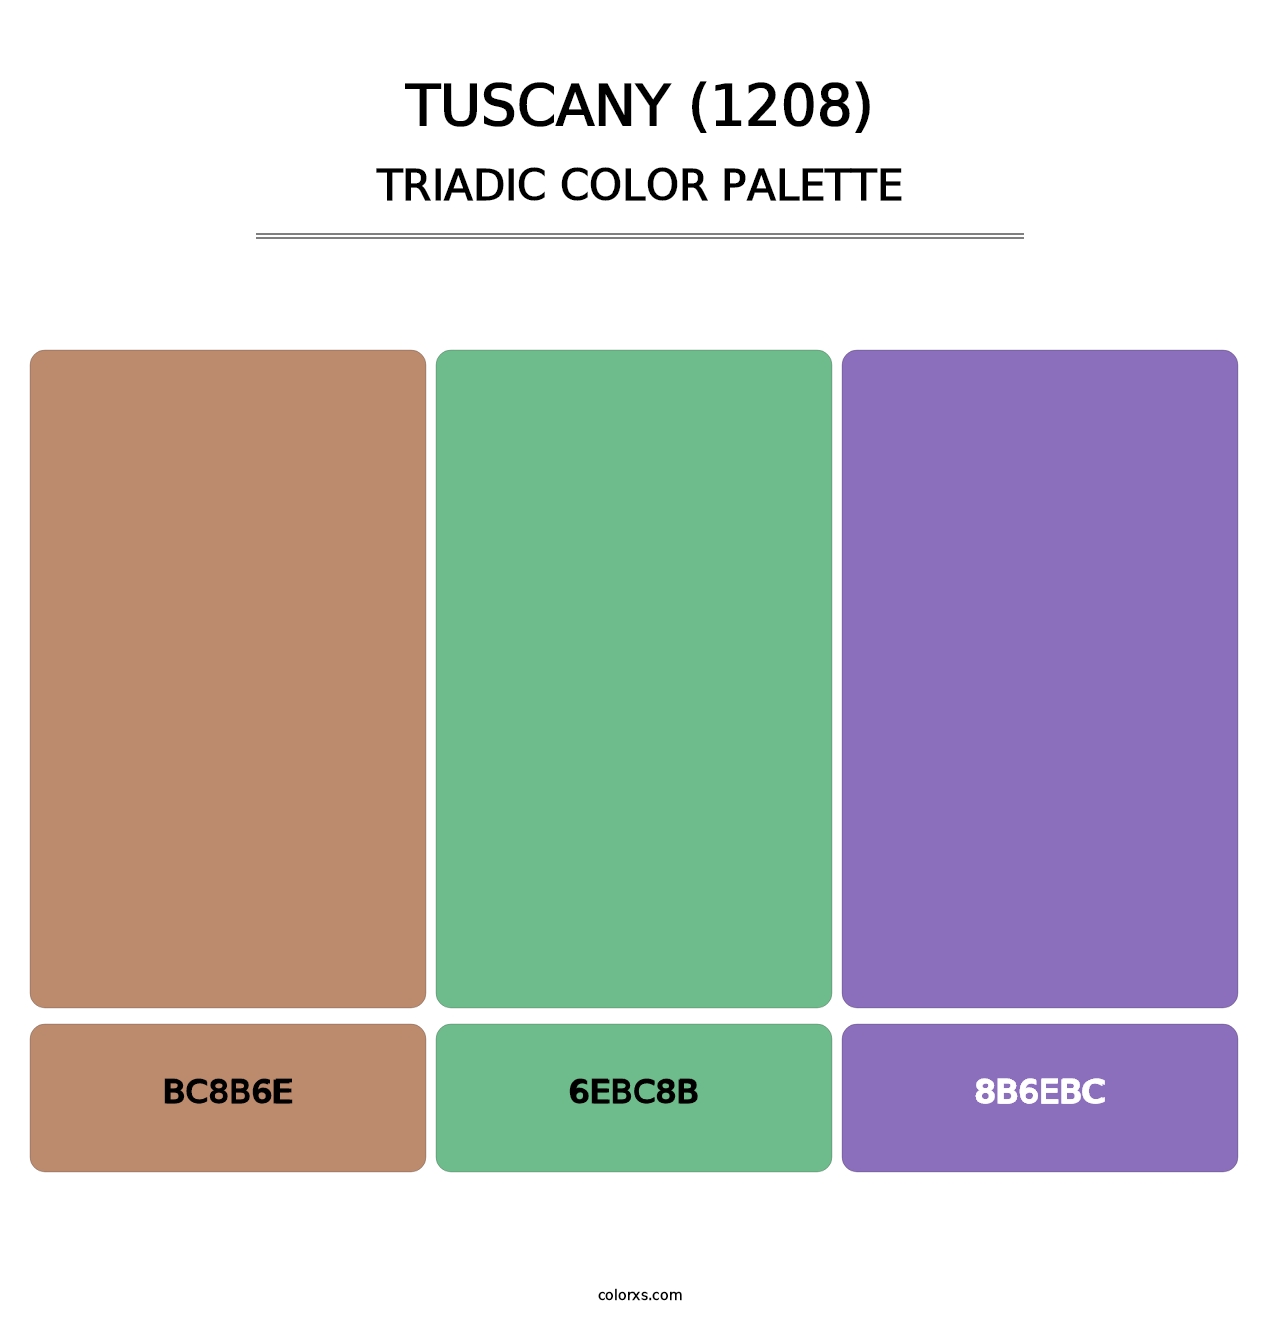 Tuscany (1208) - Triadic Color Palette